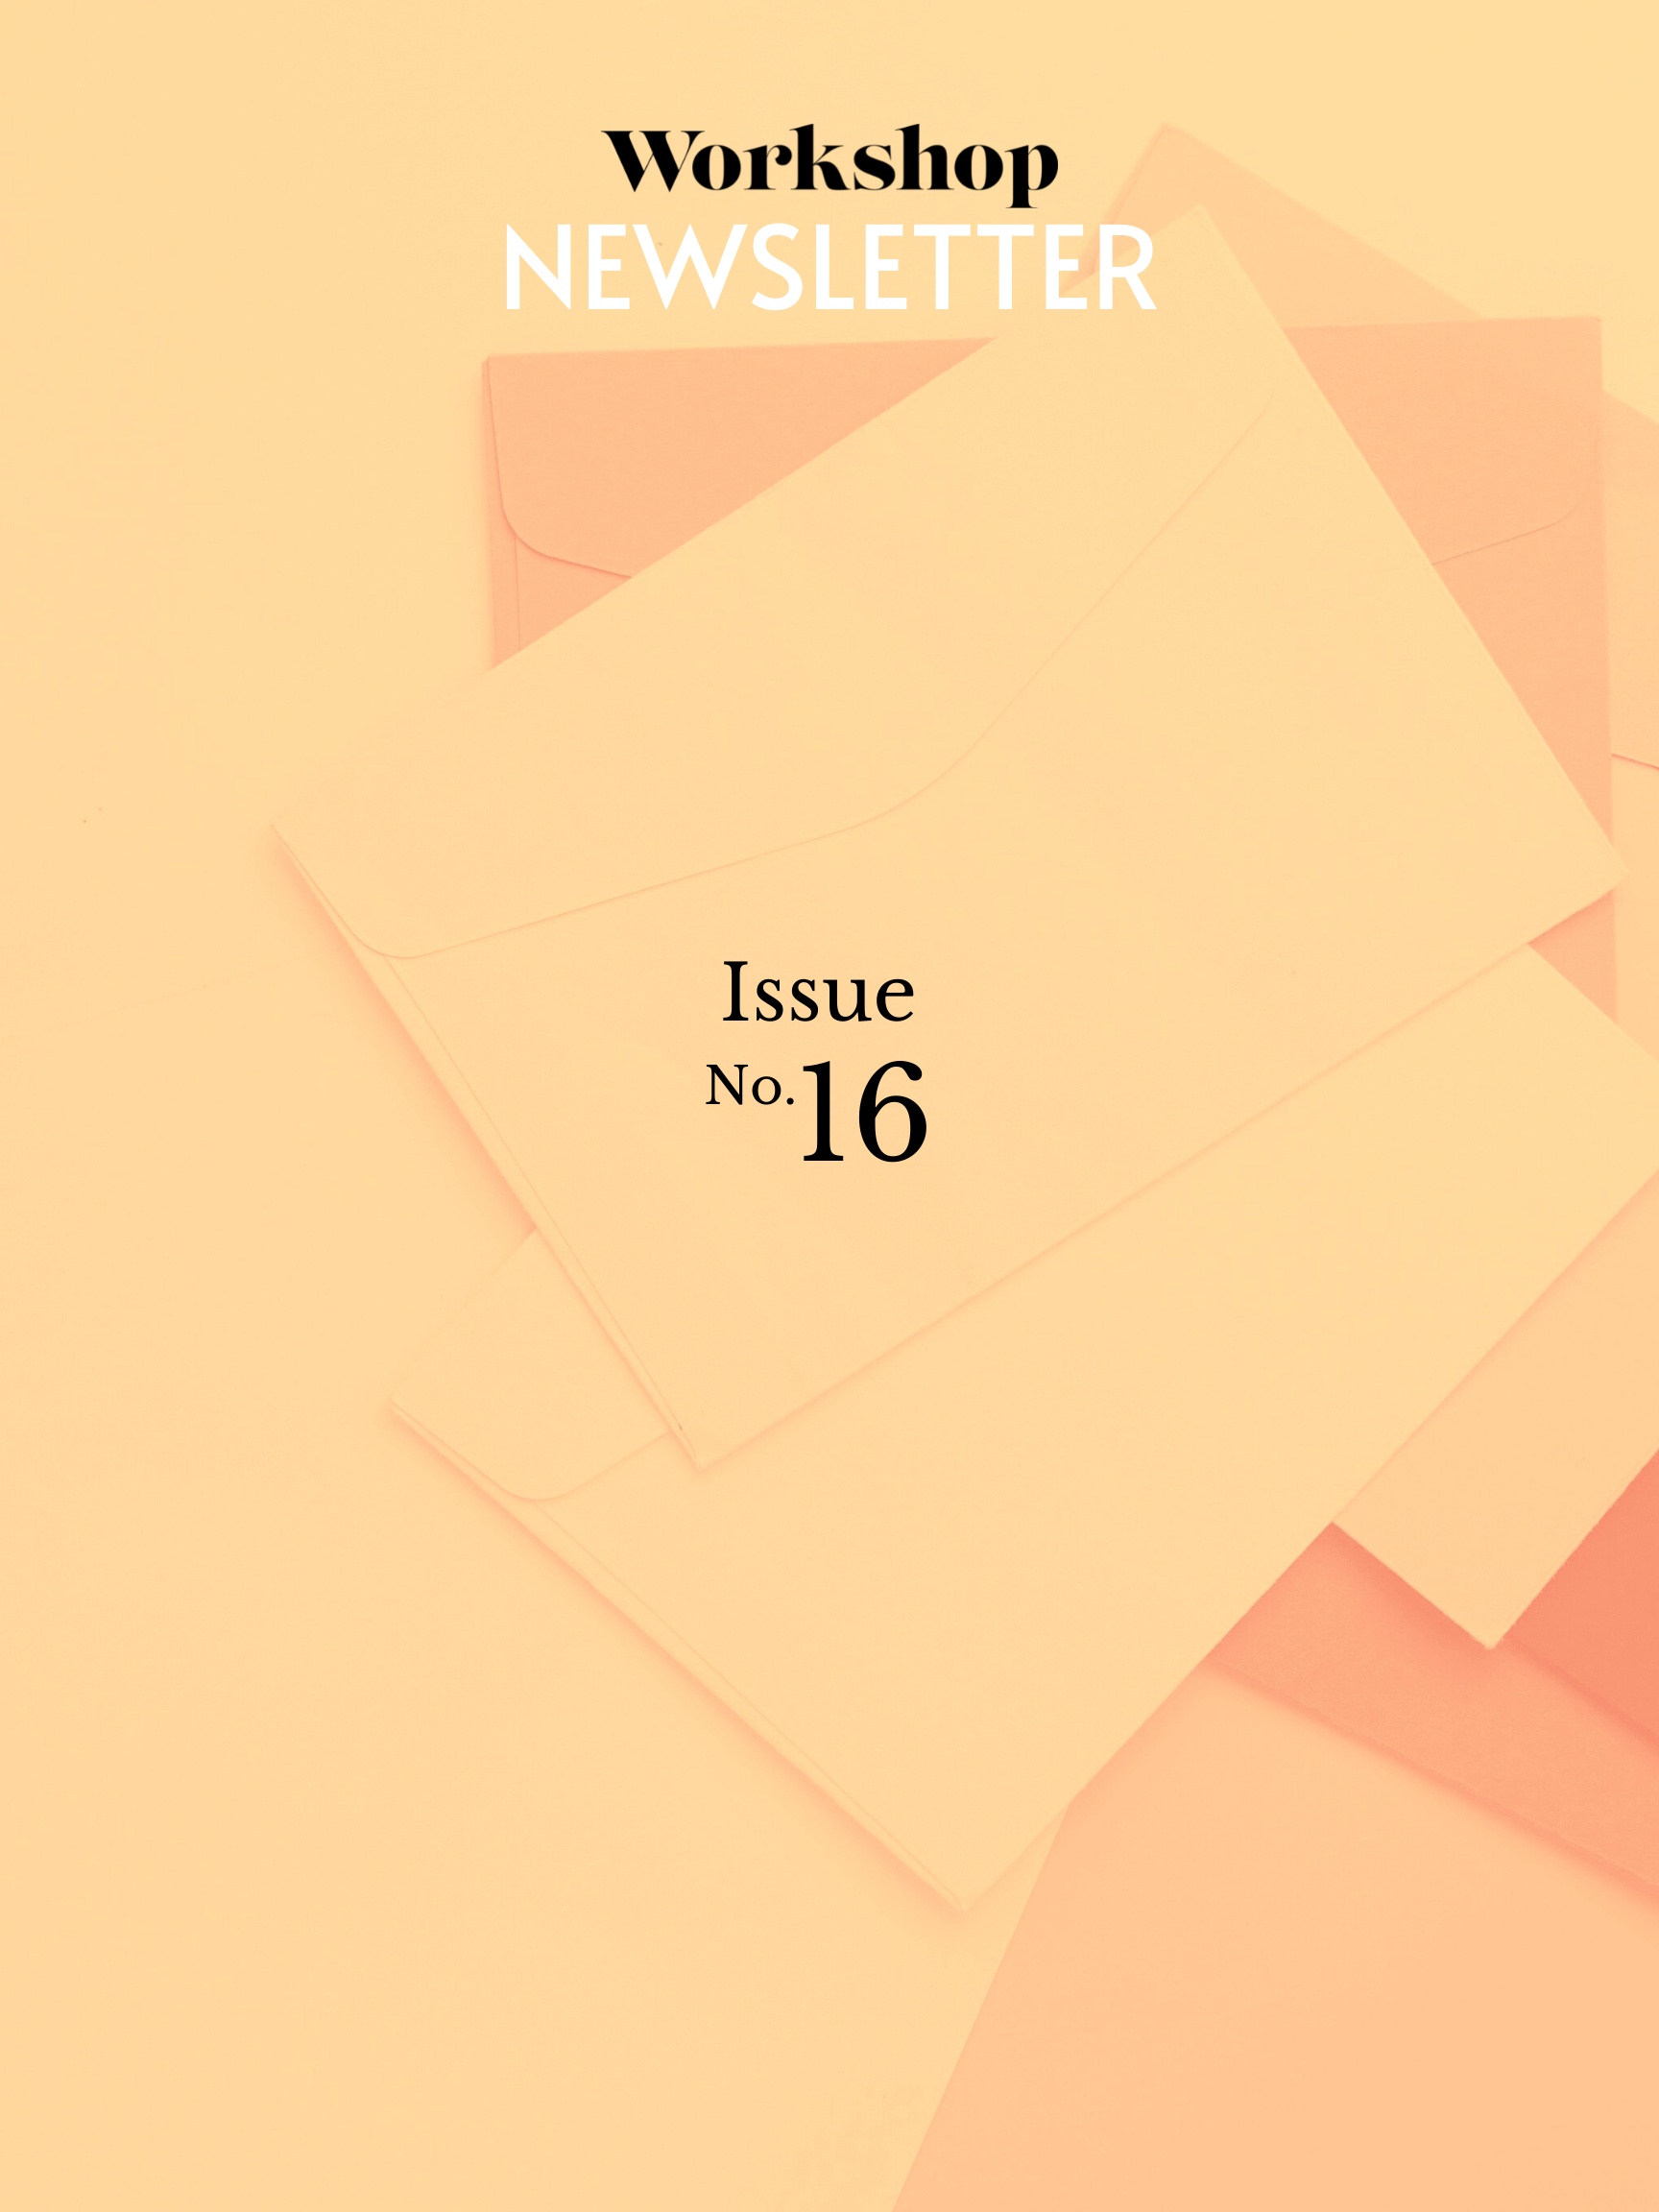 Envelopes on a surface overlaid in apricot-yellow colour, with the words "Workshop newsletter issue no. 16"